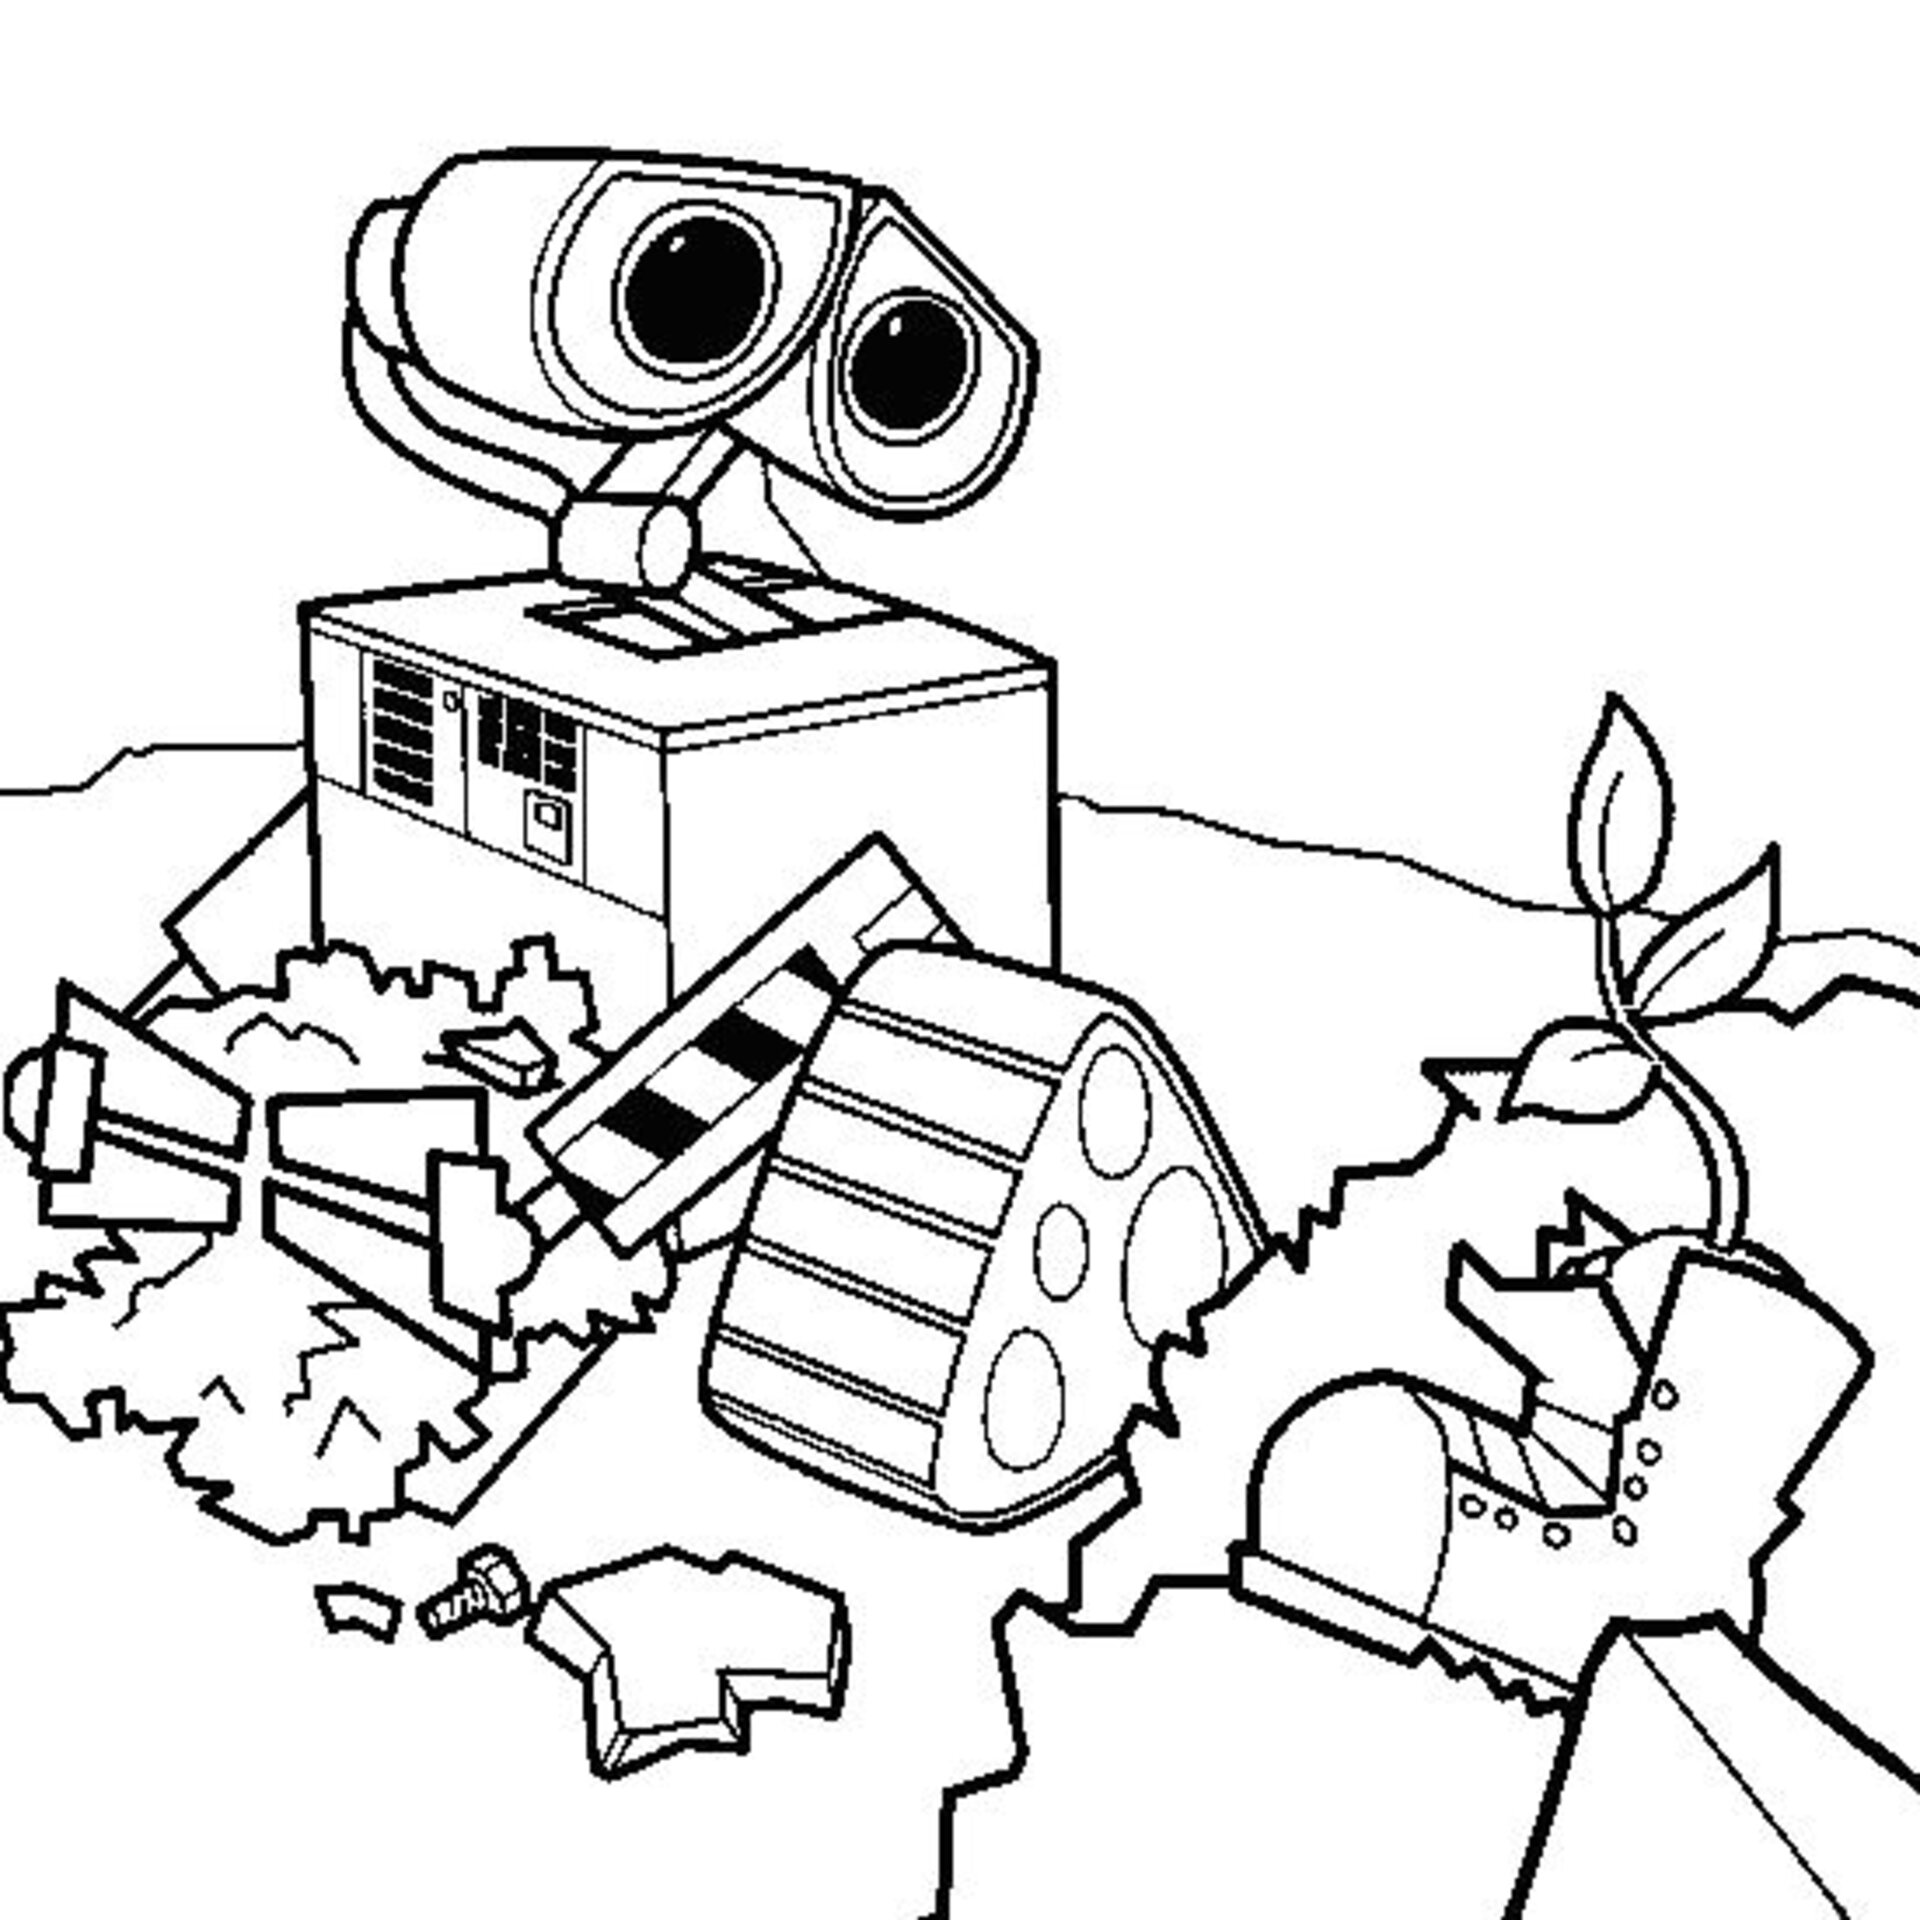 Wall-e and a plant